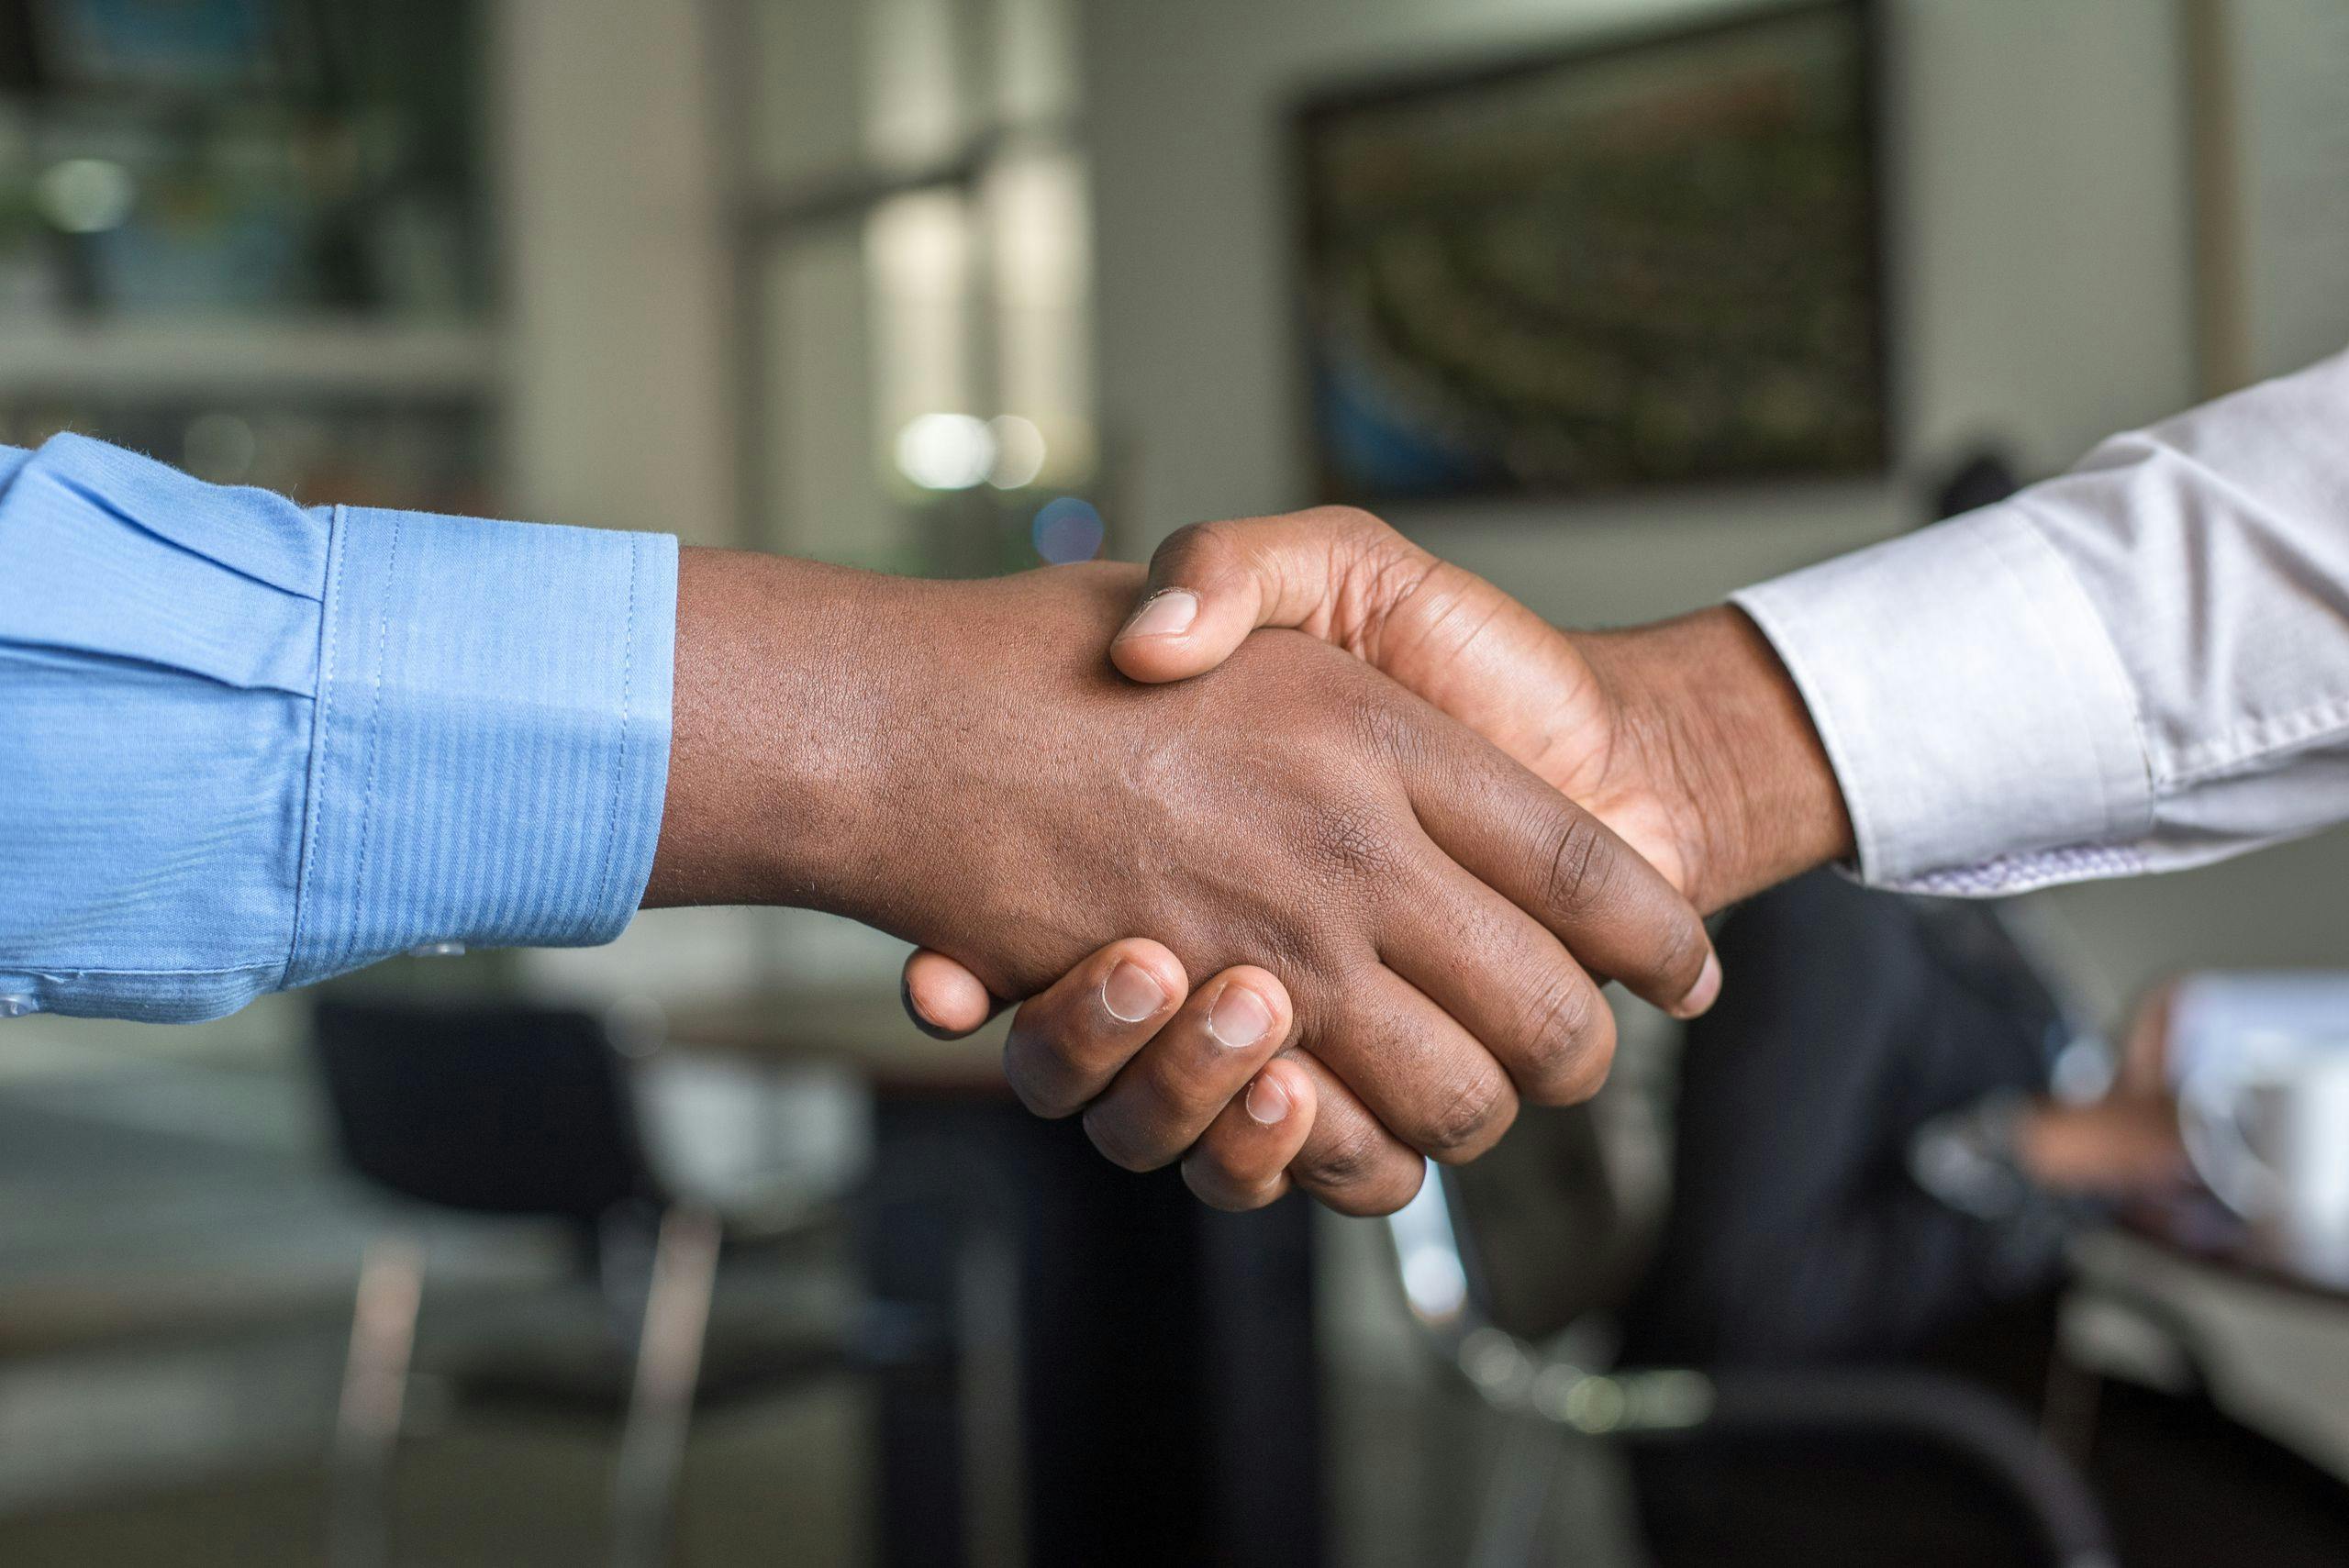 Handshake in a business context